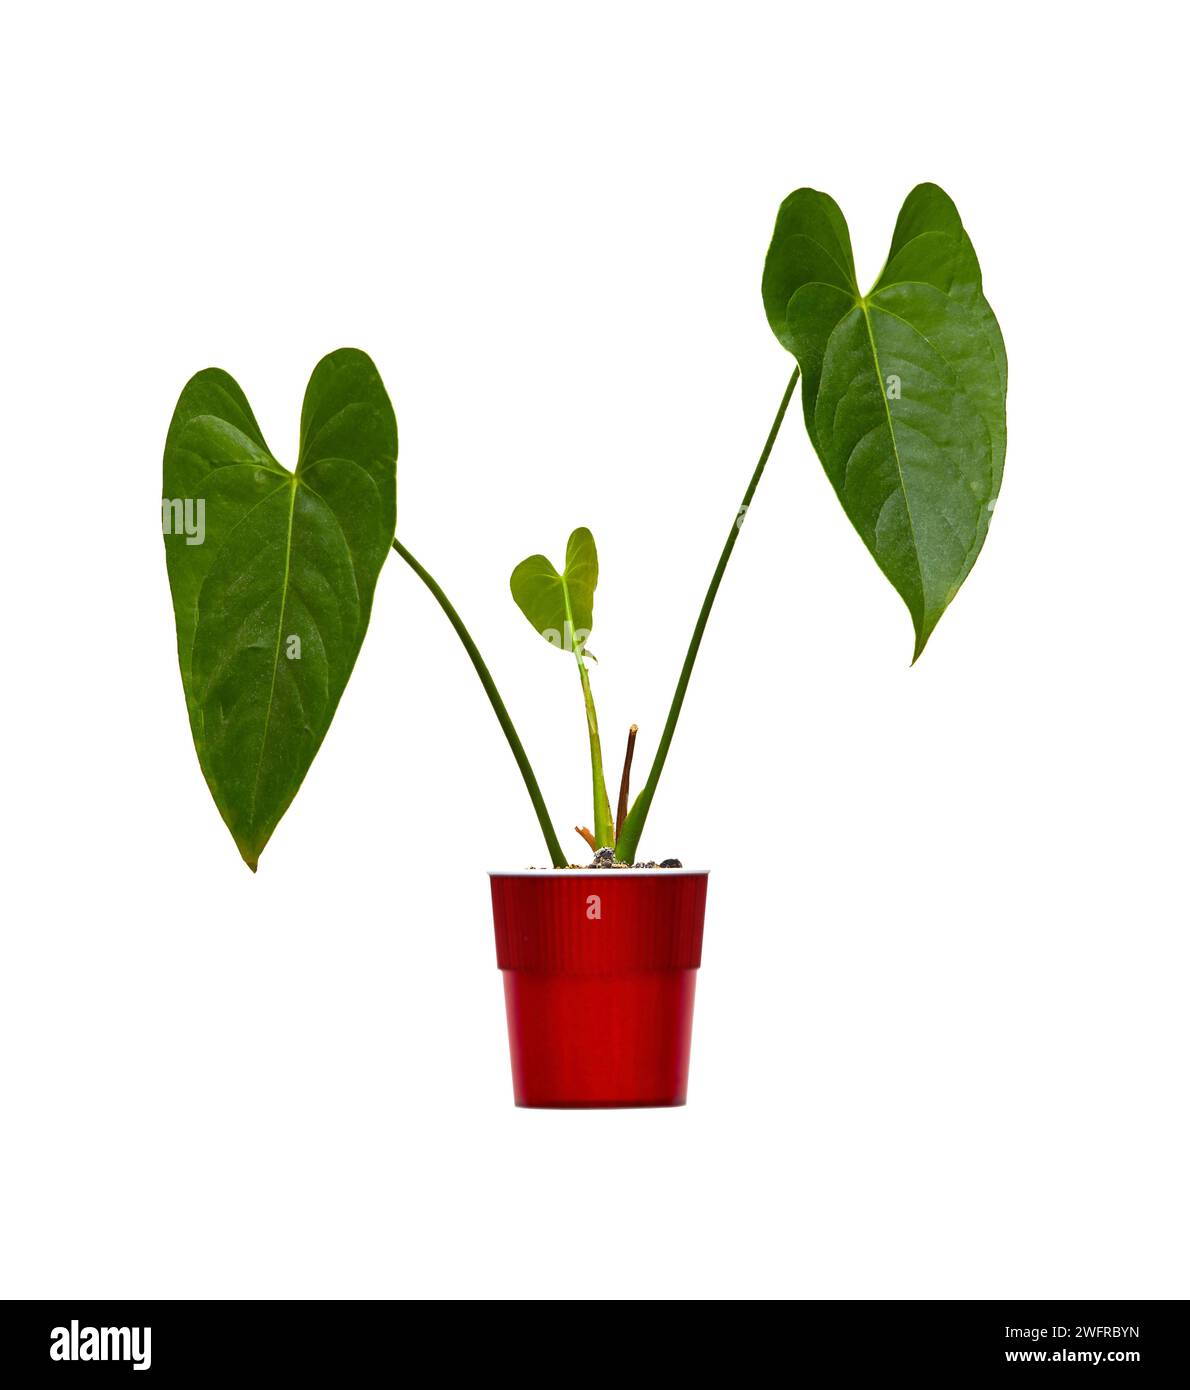 Image of a houseplant anthurium in a red pot on a white background Stock Photo